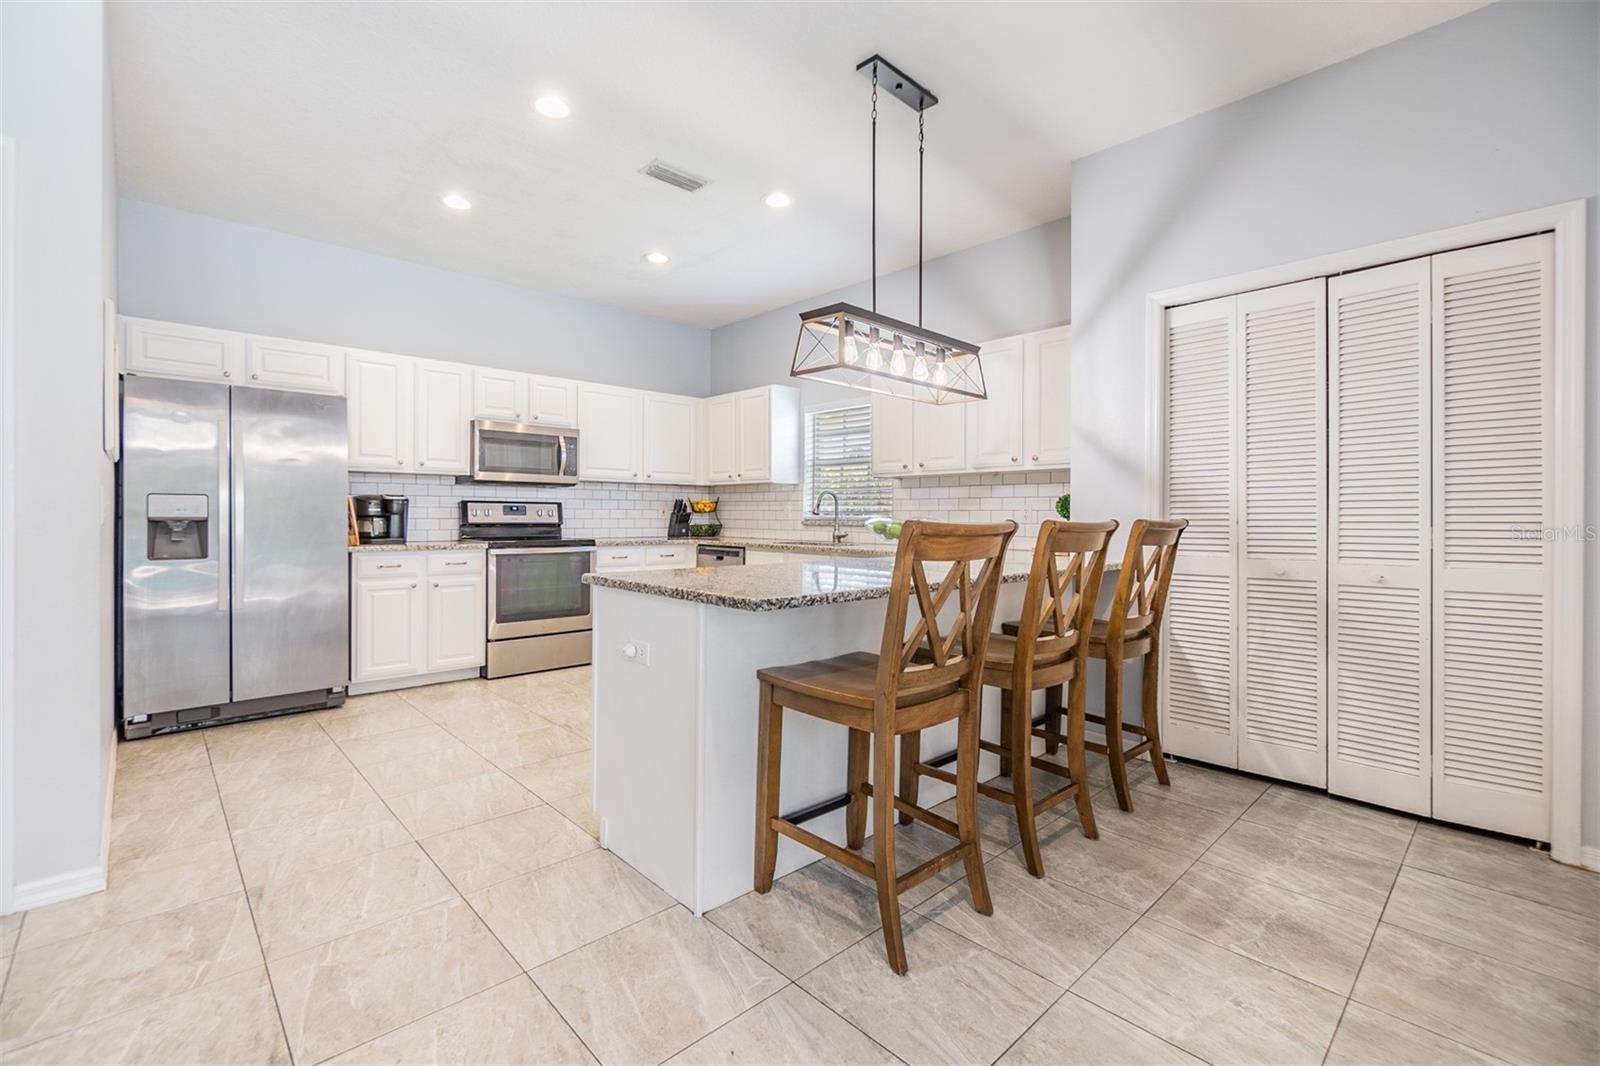 Large and Open kitchen with new light fixture, inset lighting,  Subway tile backsplash, Granite Countertops, and Stainless Steel appliances.